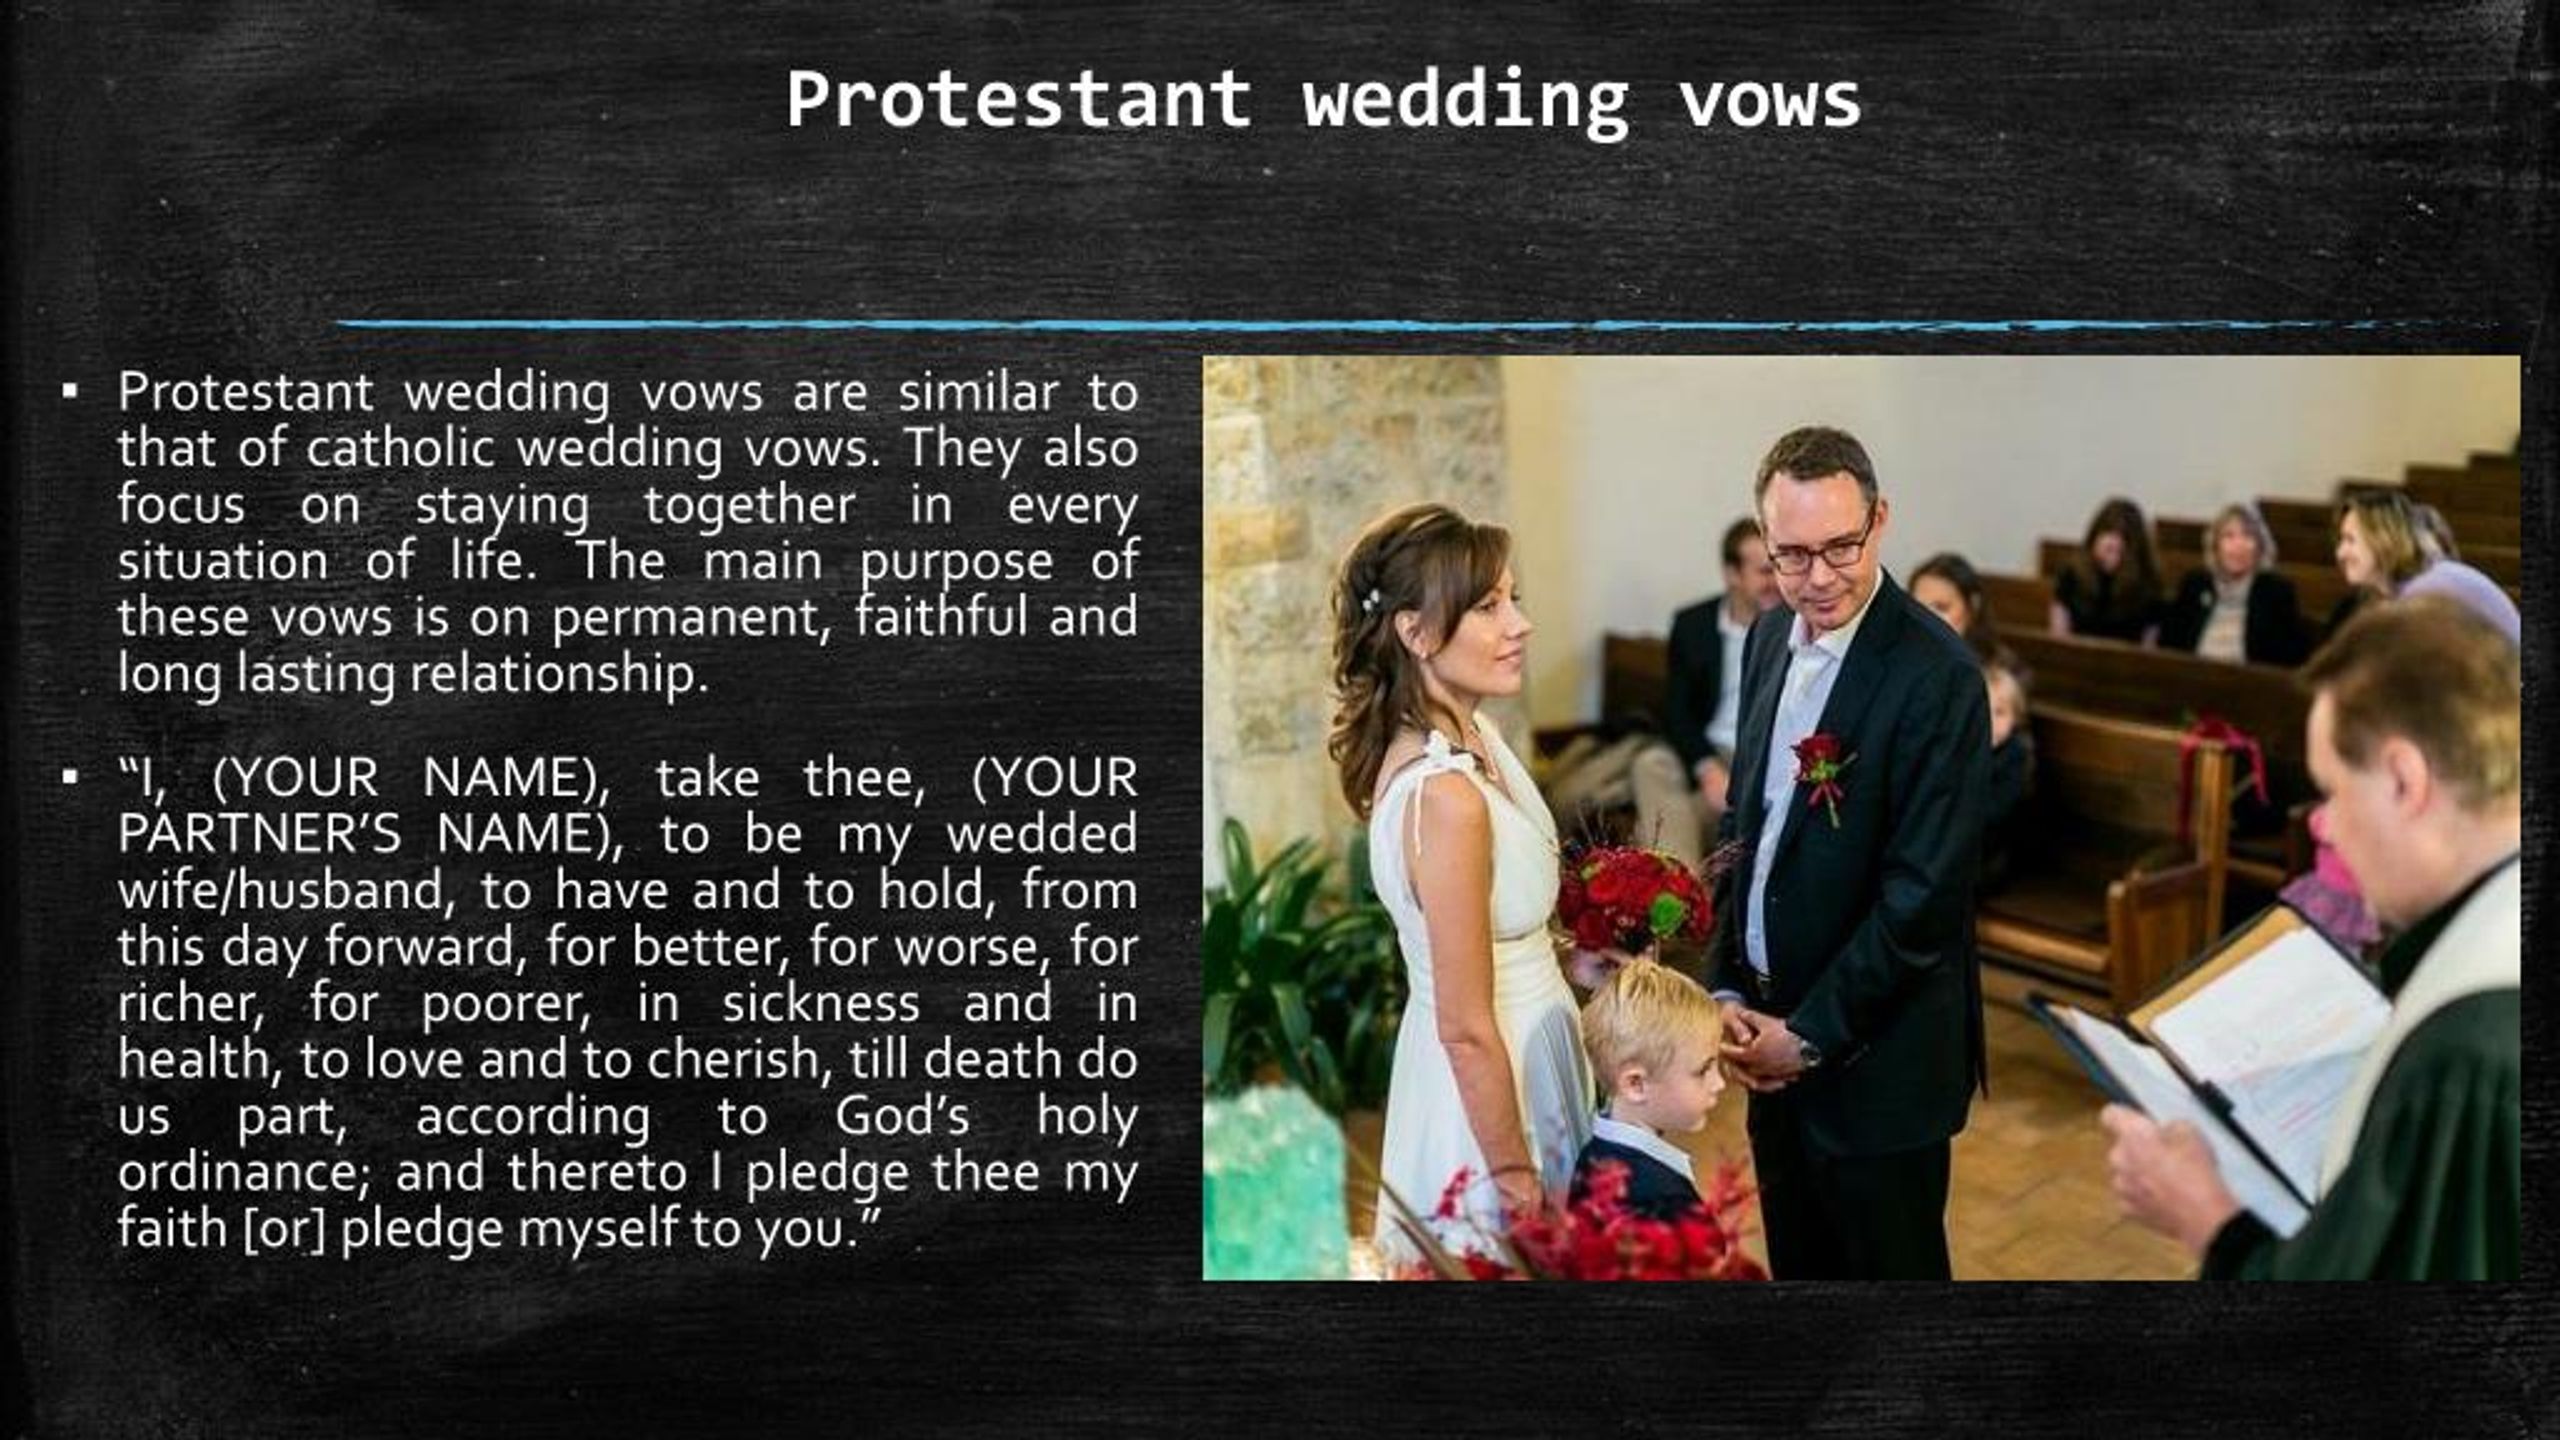 PPT Amazingly Traditional Wedding Vows From Various